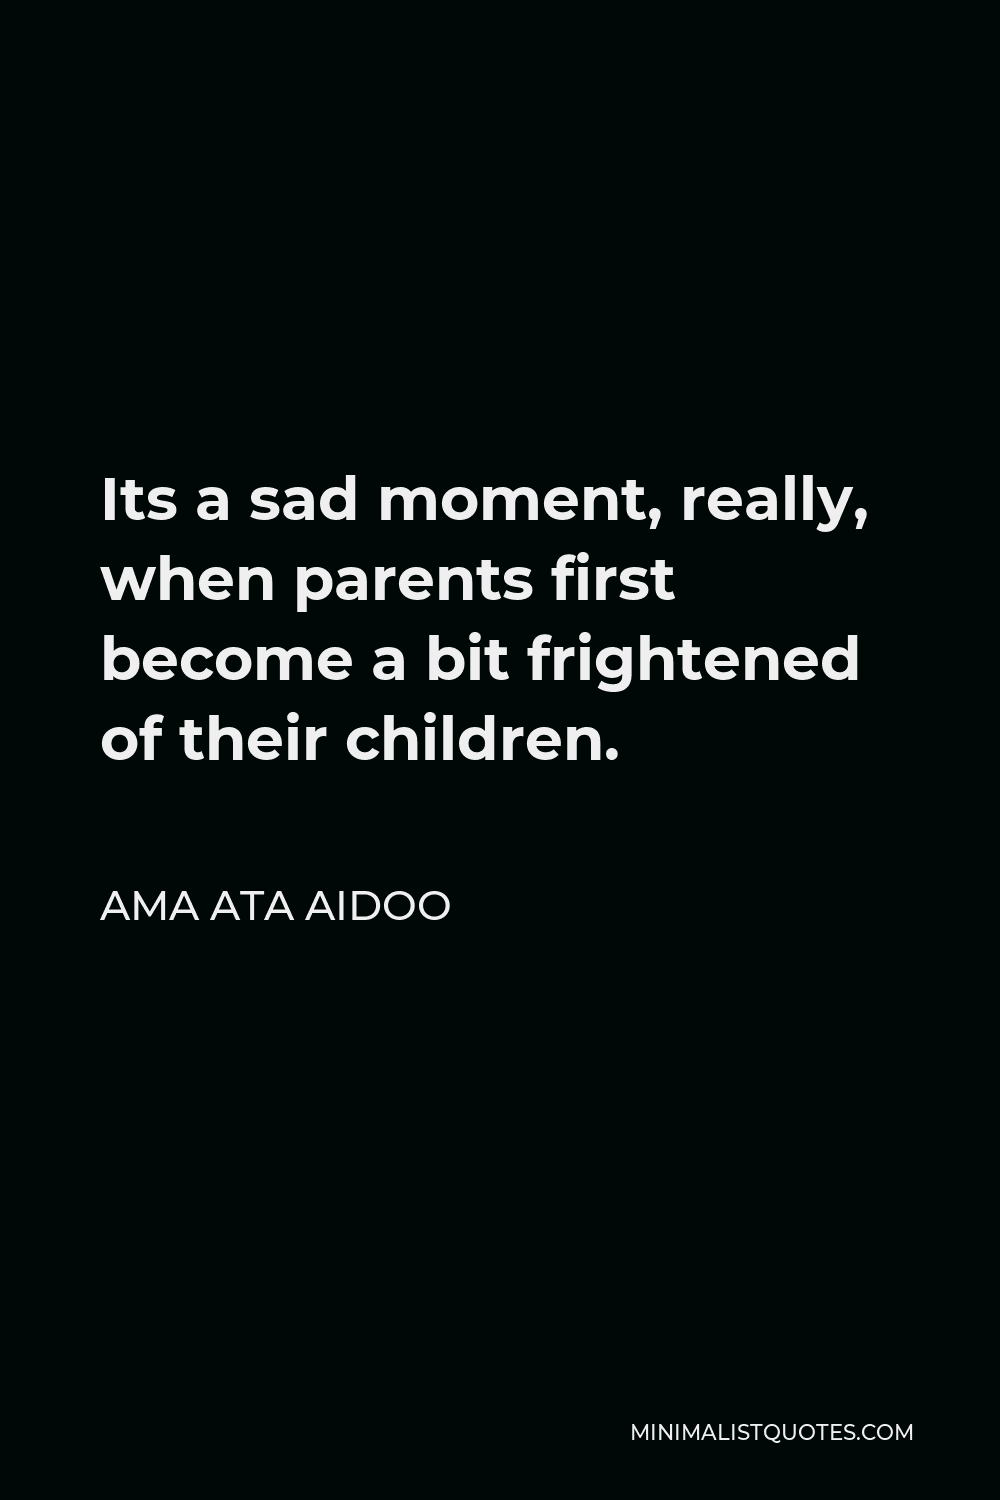 Ama Ata Aidoo Quote - Its a sad moment, really, when parents first become a bit frightened of their children.